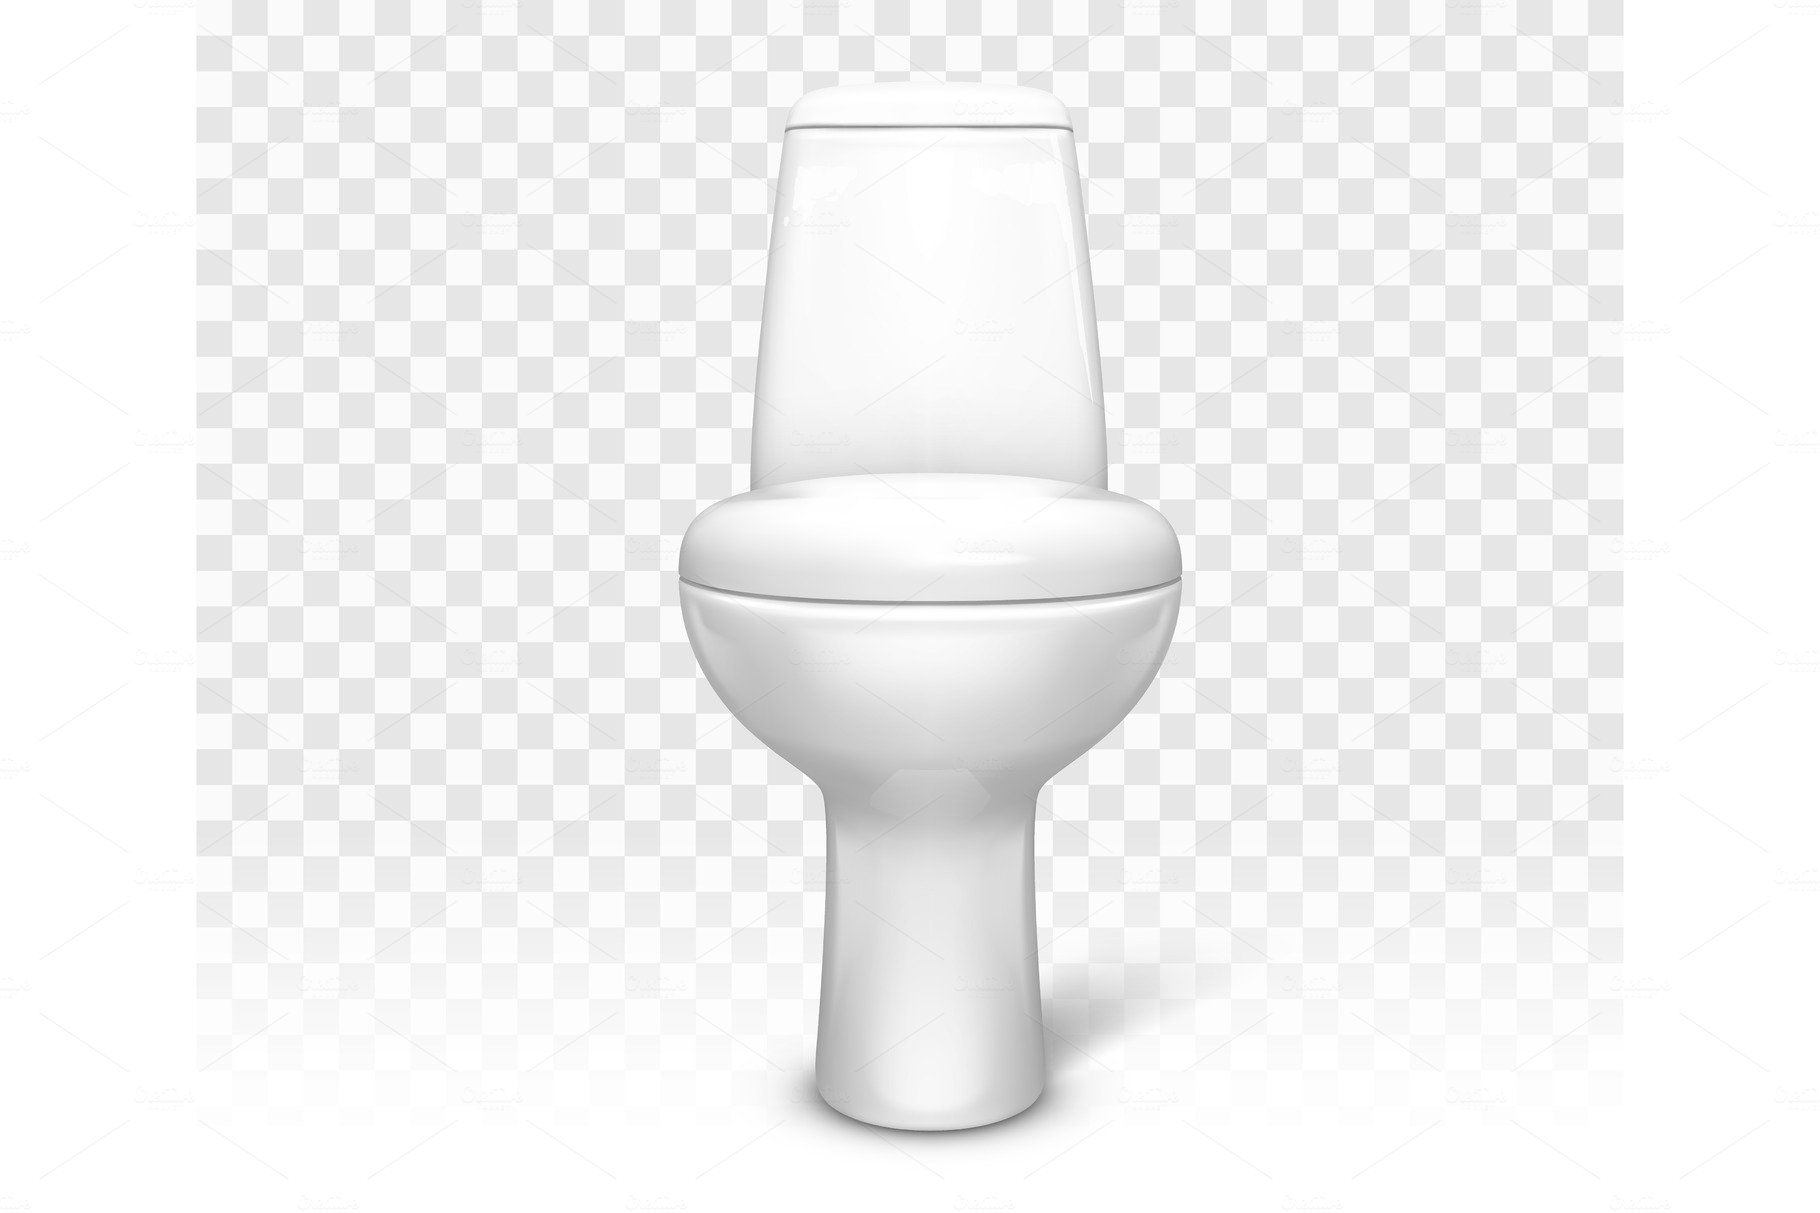 Toilet with seat. White ceramic cover image.